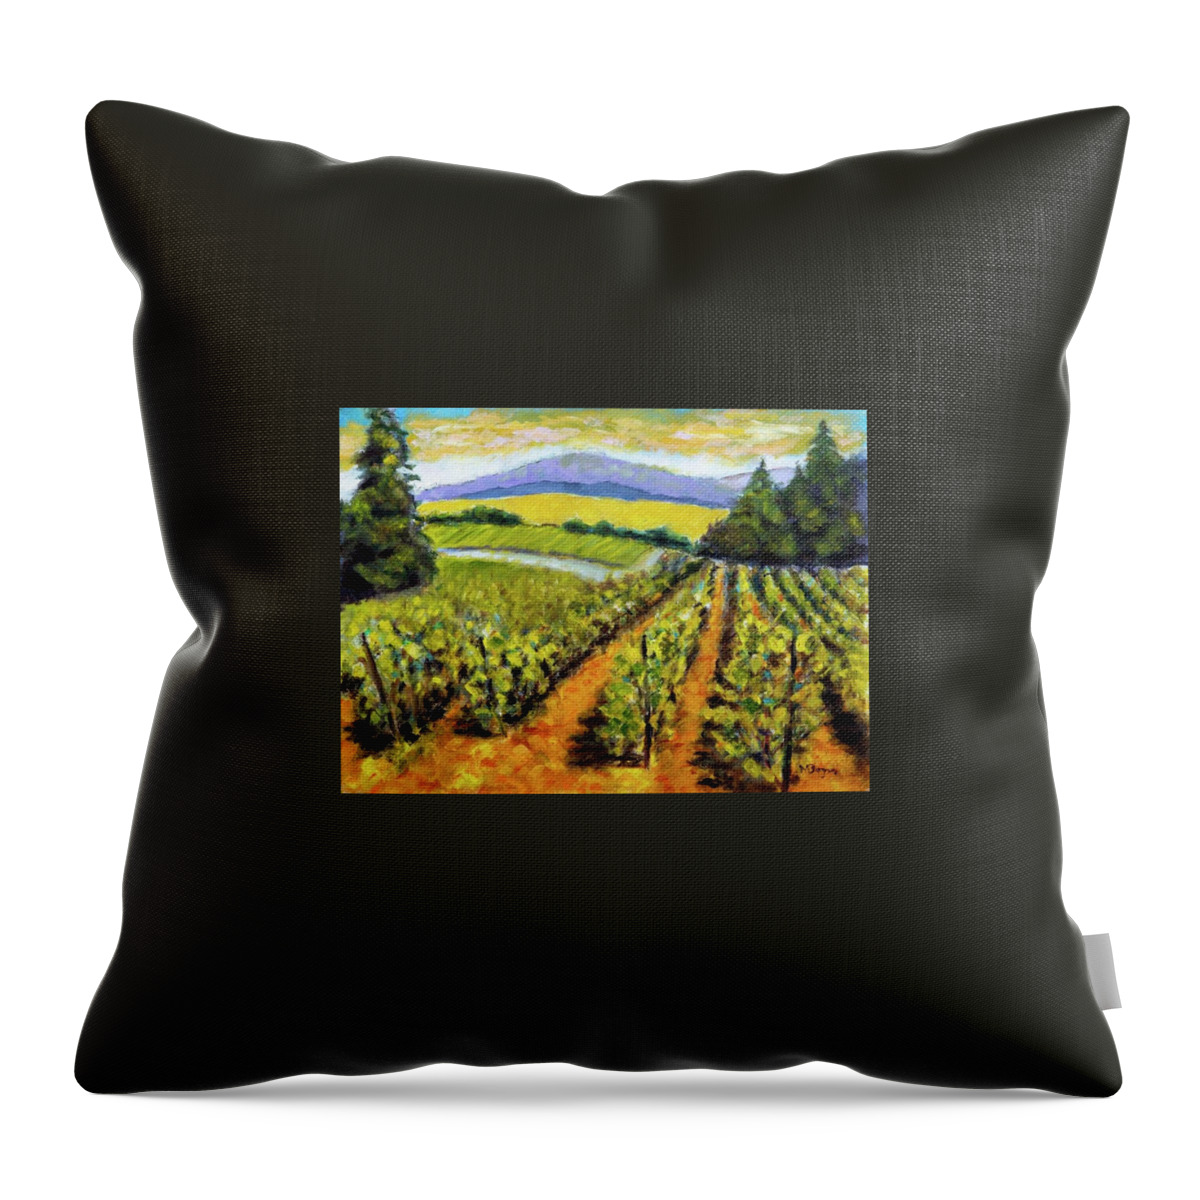 Landscape Throw Pillow featuring the painting Lumos Vineyard Philomath by Mike Bergen